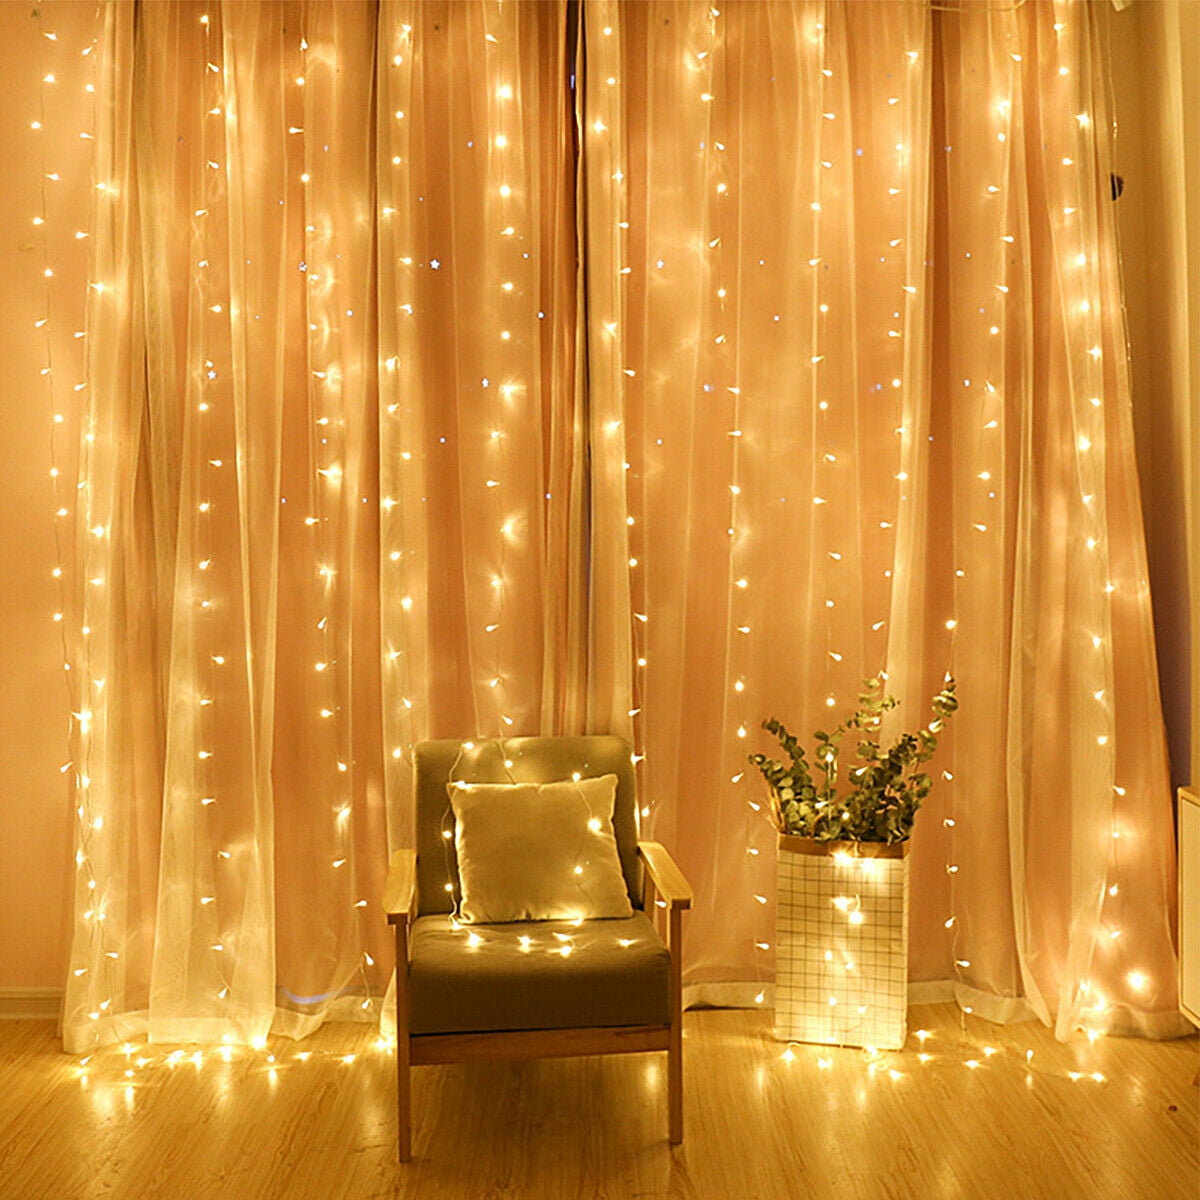 300 LED 9ftx9ft Fairy Curtain String Lights 8 modes Christmas Wedding Plug in